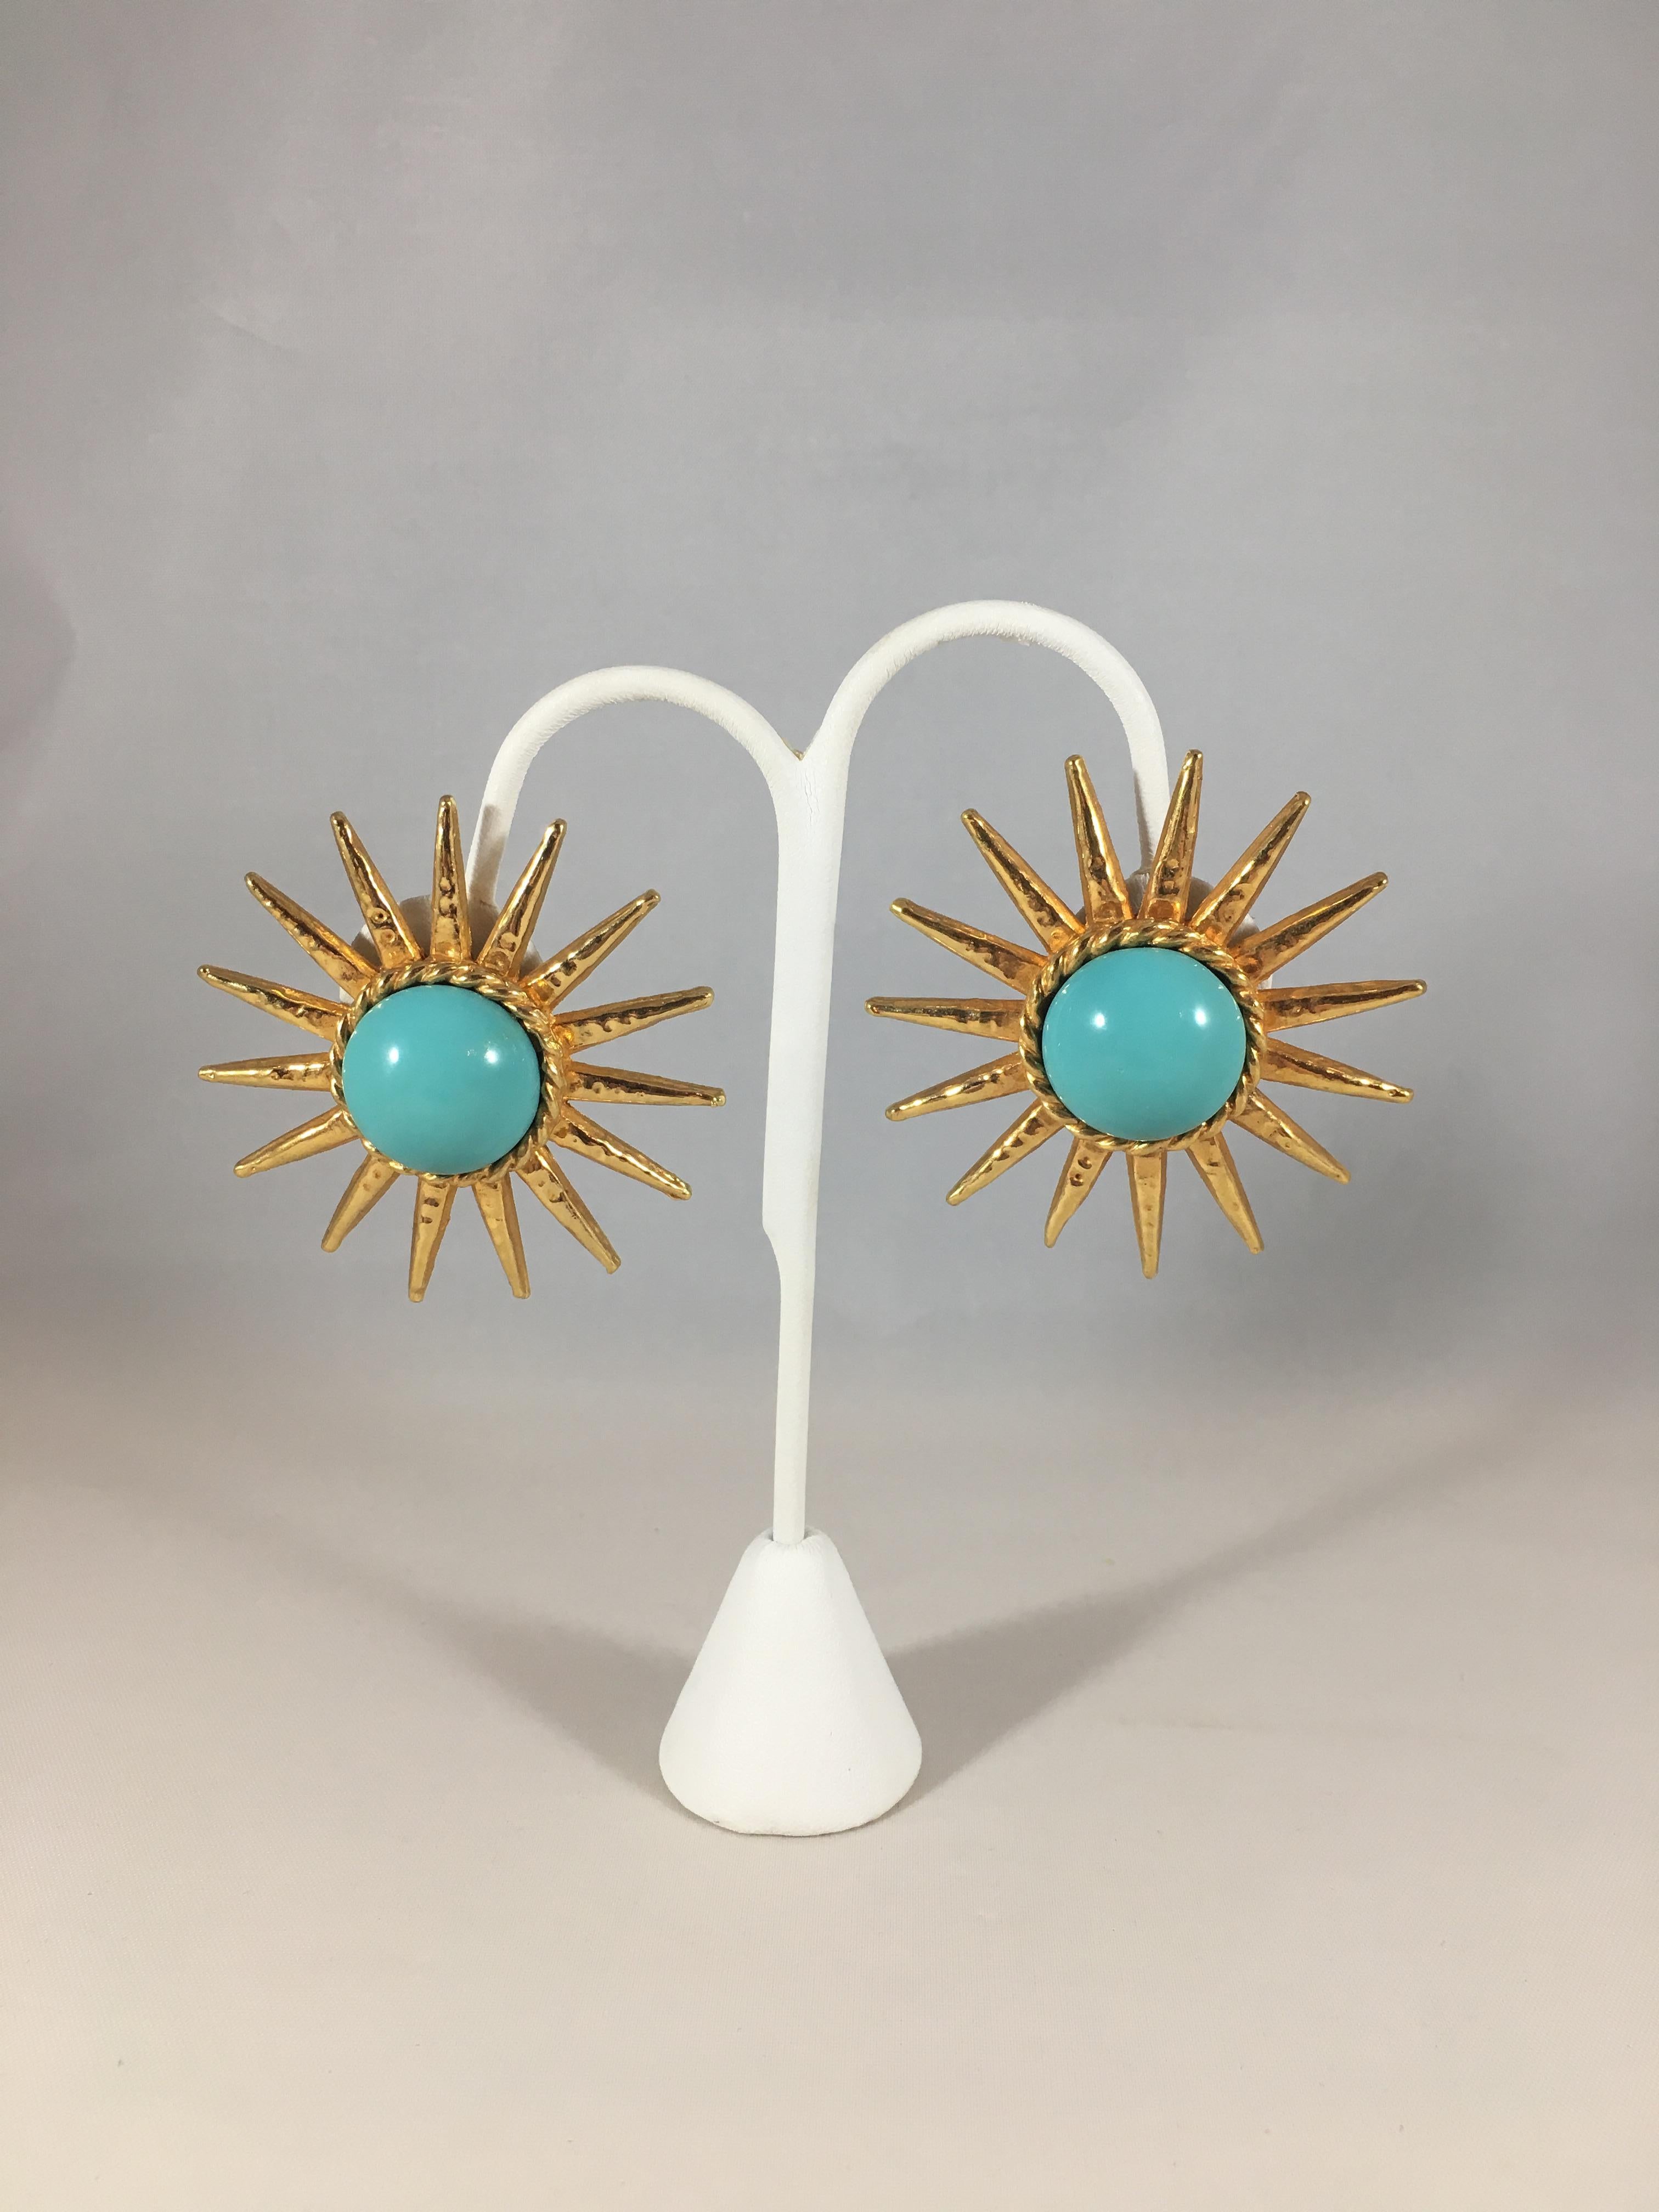 Women's Phillipe Ferrandis Star Earrings with Turquoise Centers, 1990s For Sale